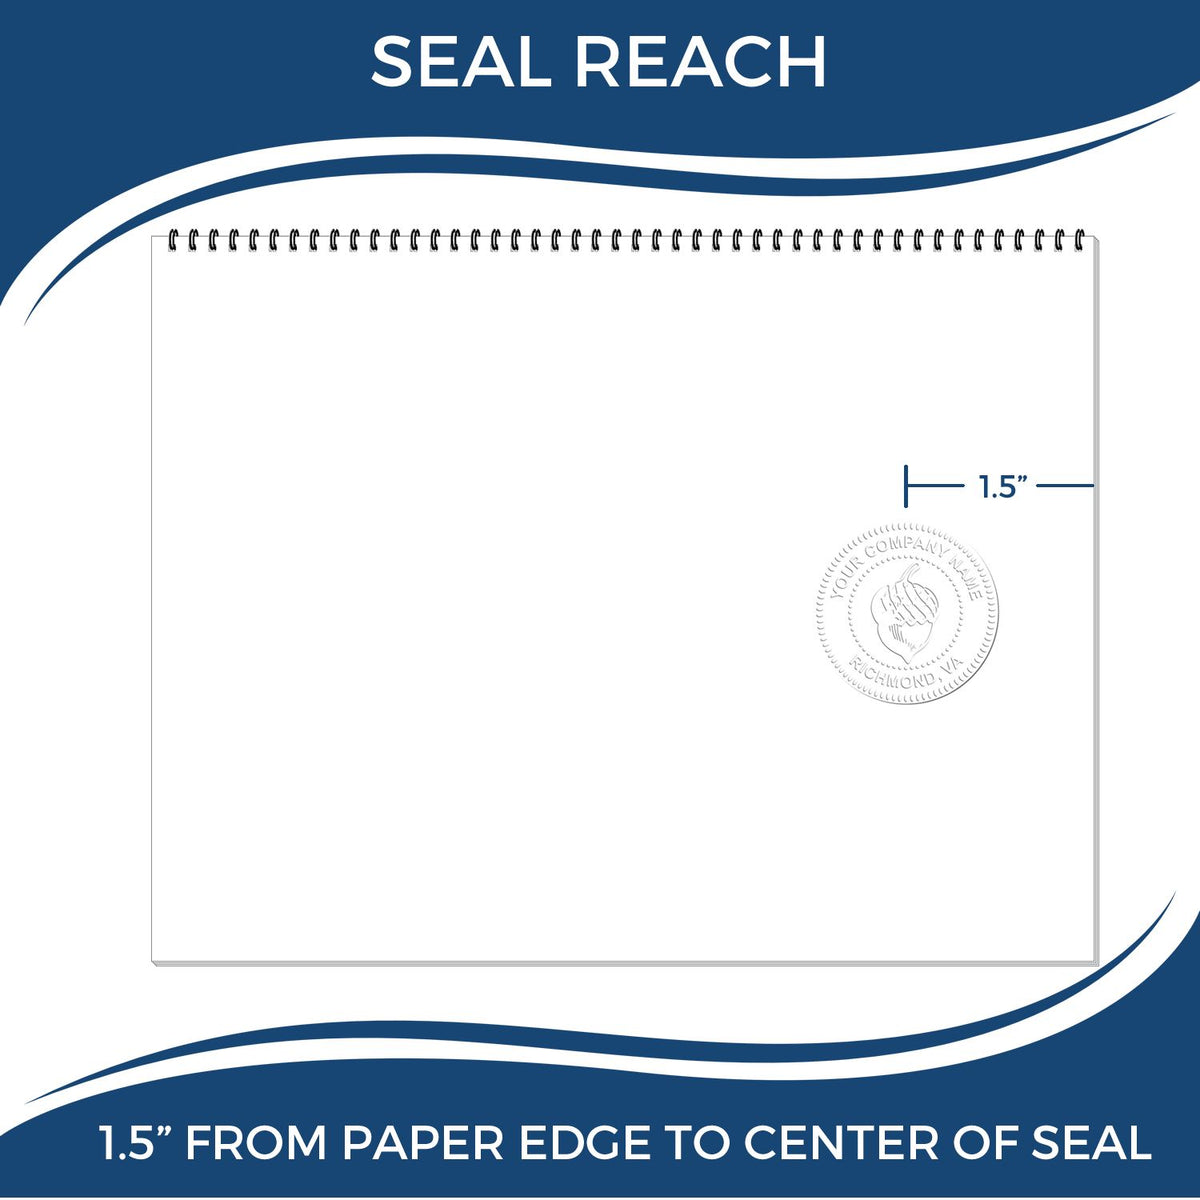 An infographic showing the seal reach which is represented by a ruler and a miniature seal image of the Michigan Engineer Desk Seal